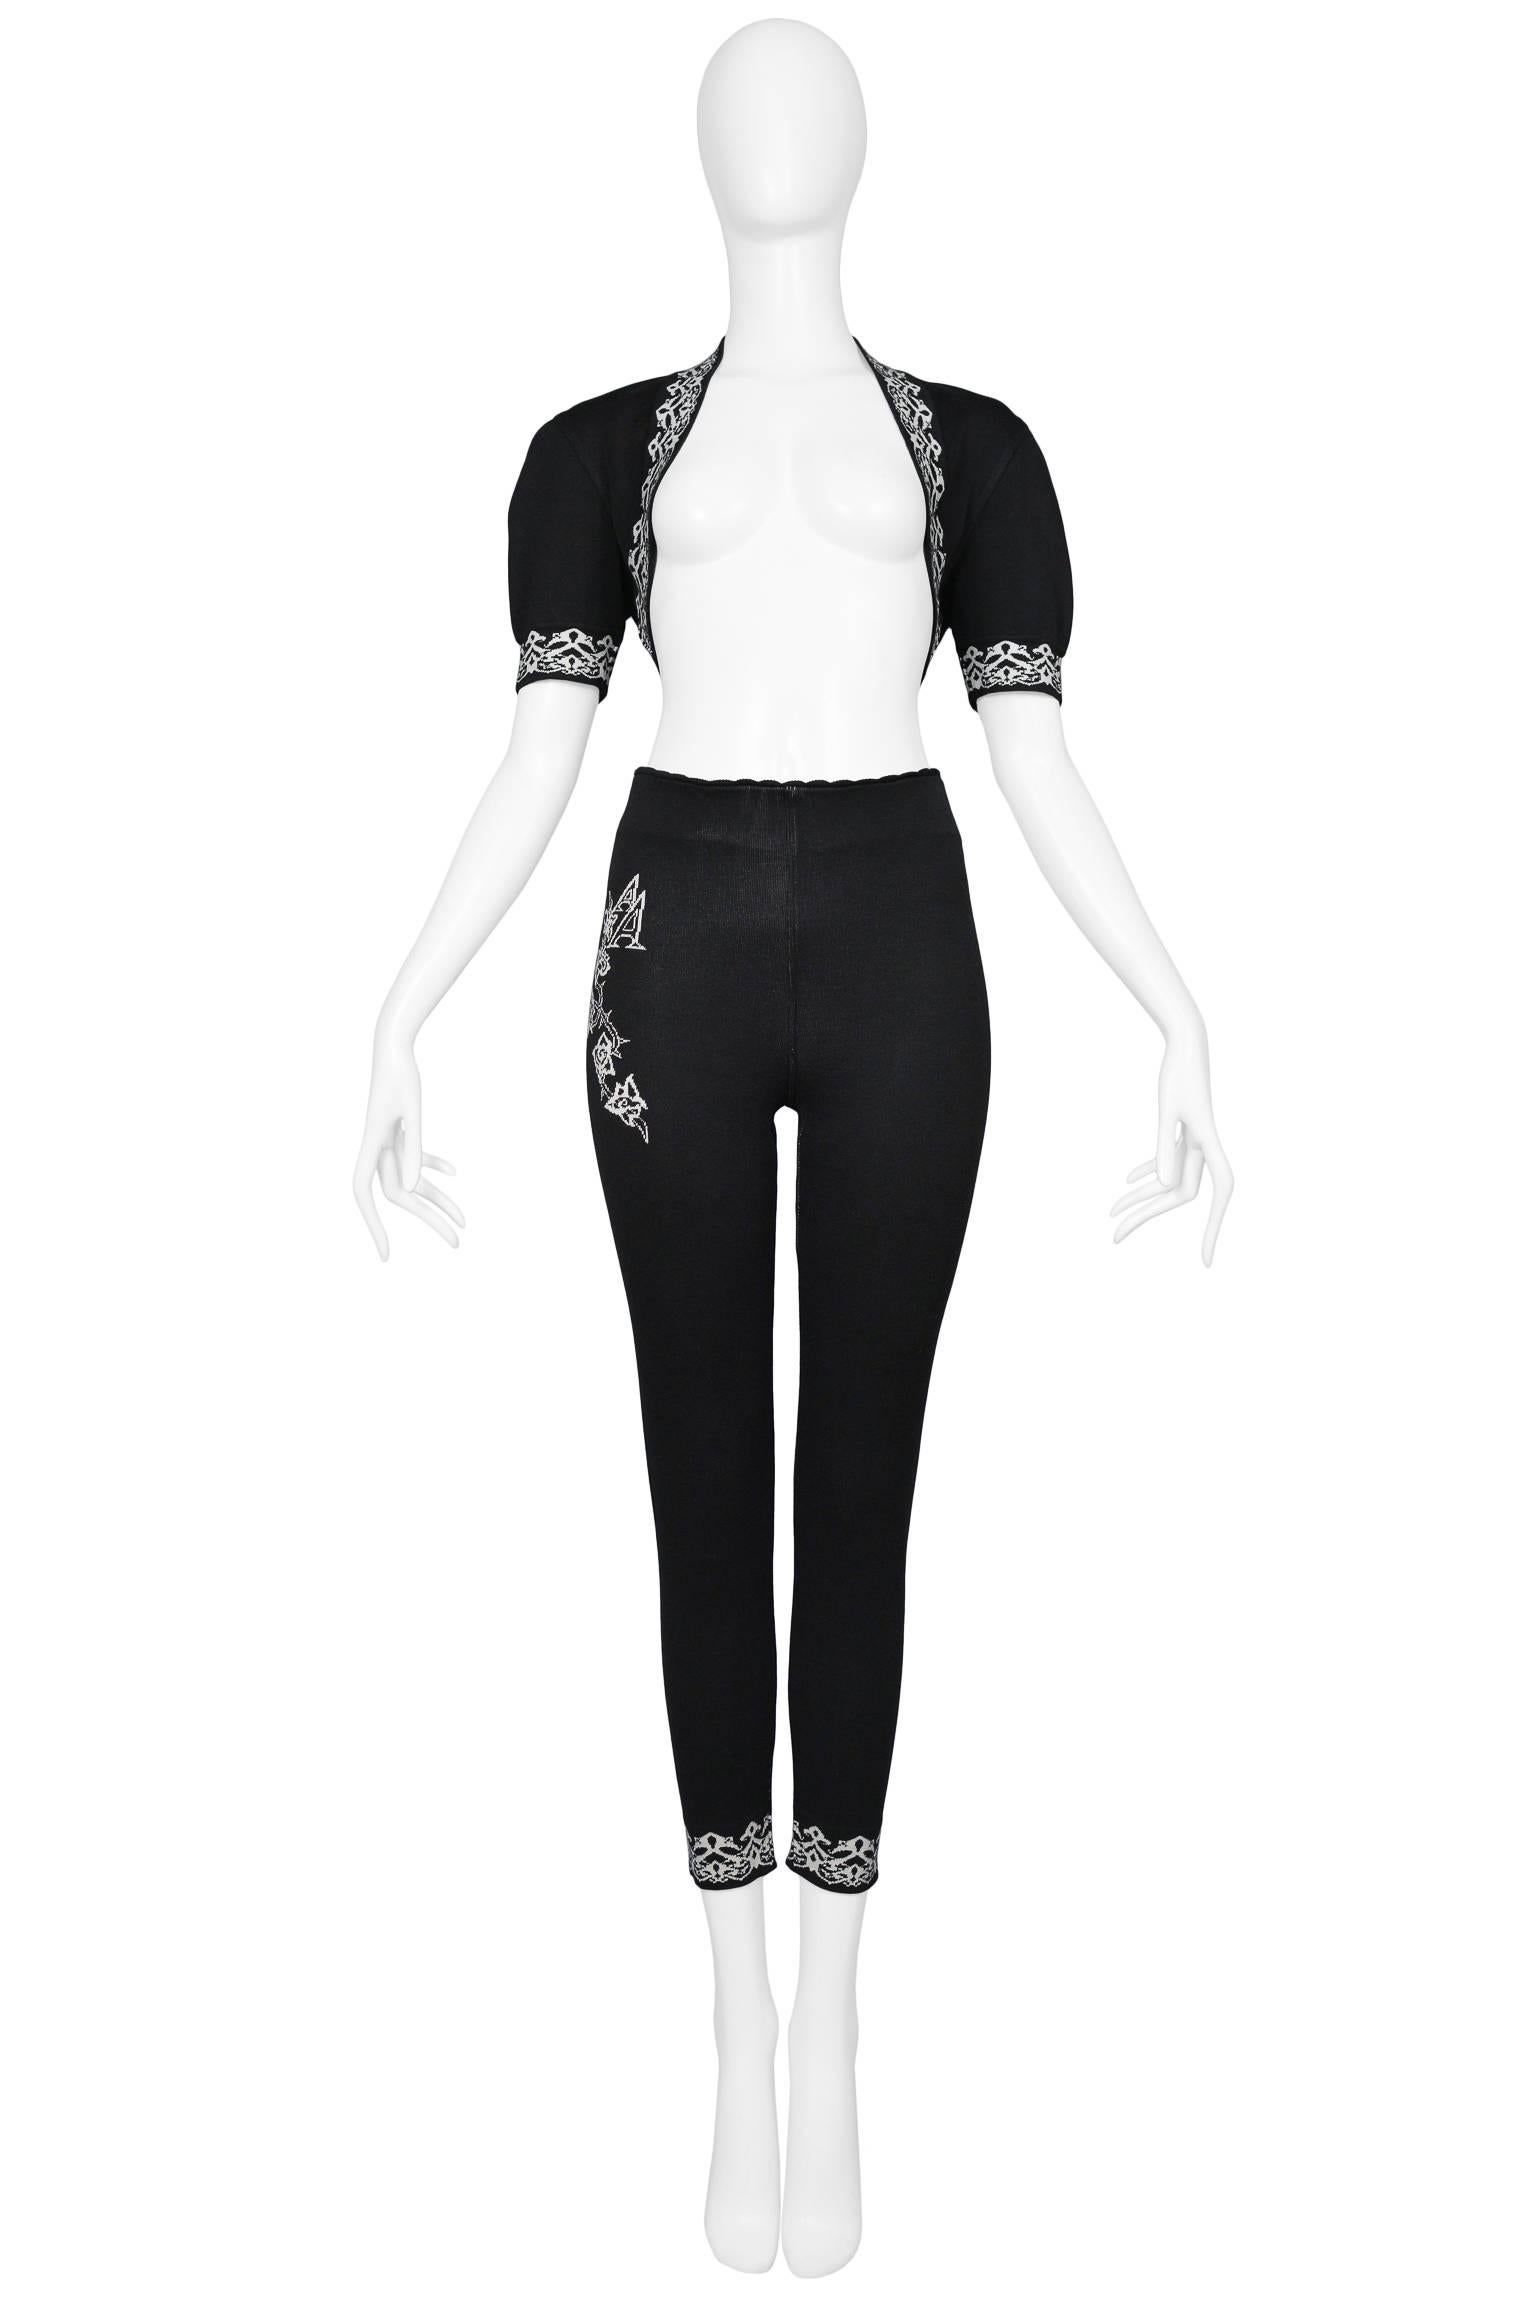 Vintage Azzedine Alaia black knit ensemble featuring a short sleeve cropped bolero cardigan with a white intarsia graphic along the sleeves and neckline.  The leggings feature matching graphic detail at the ankle bands and a double 